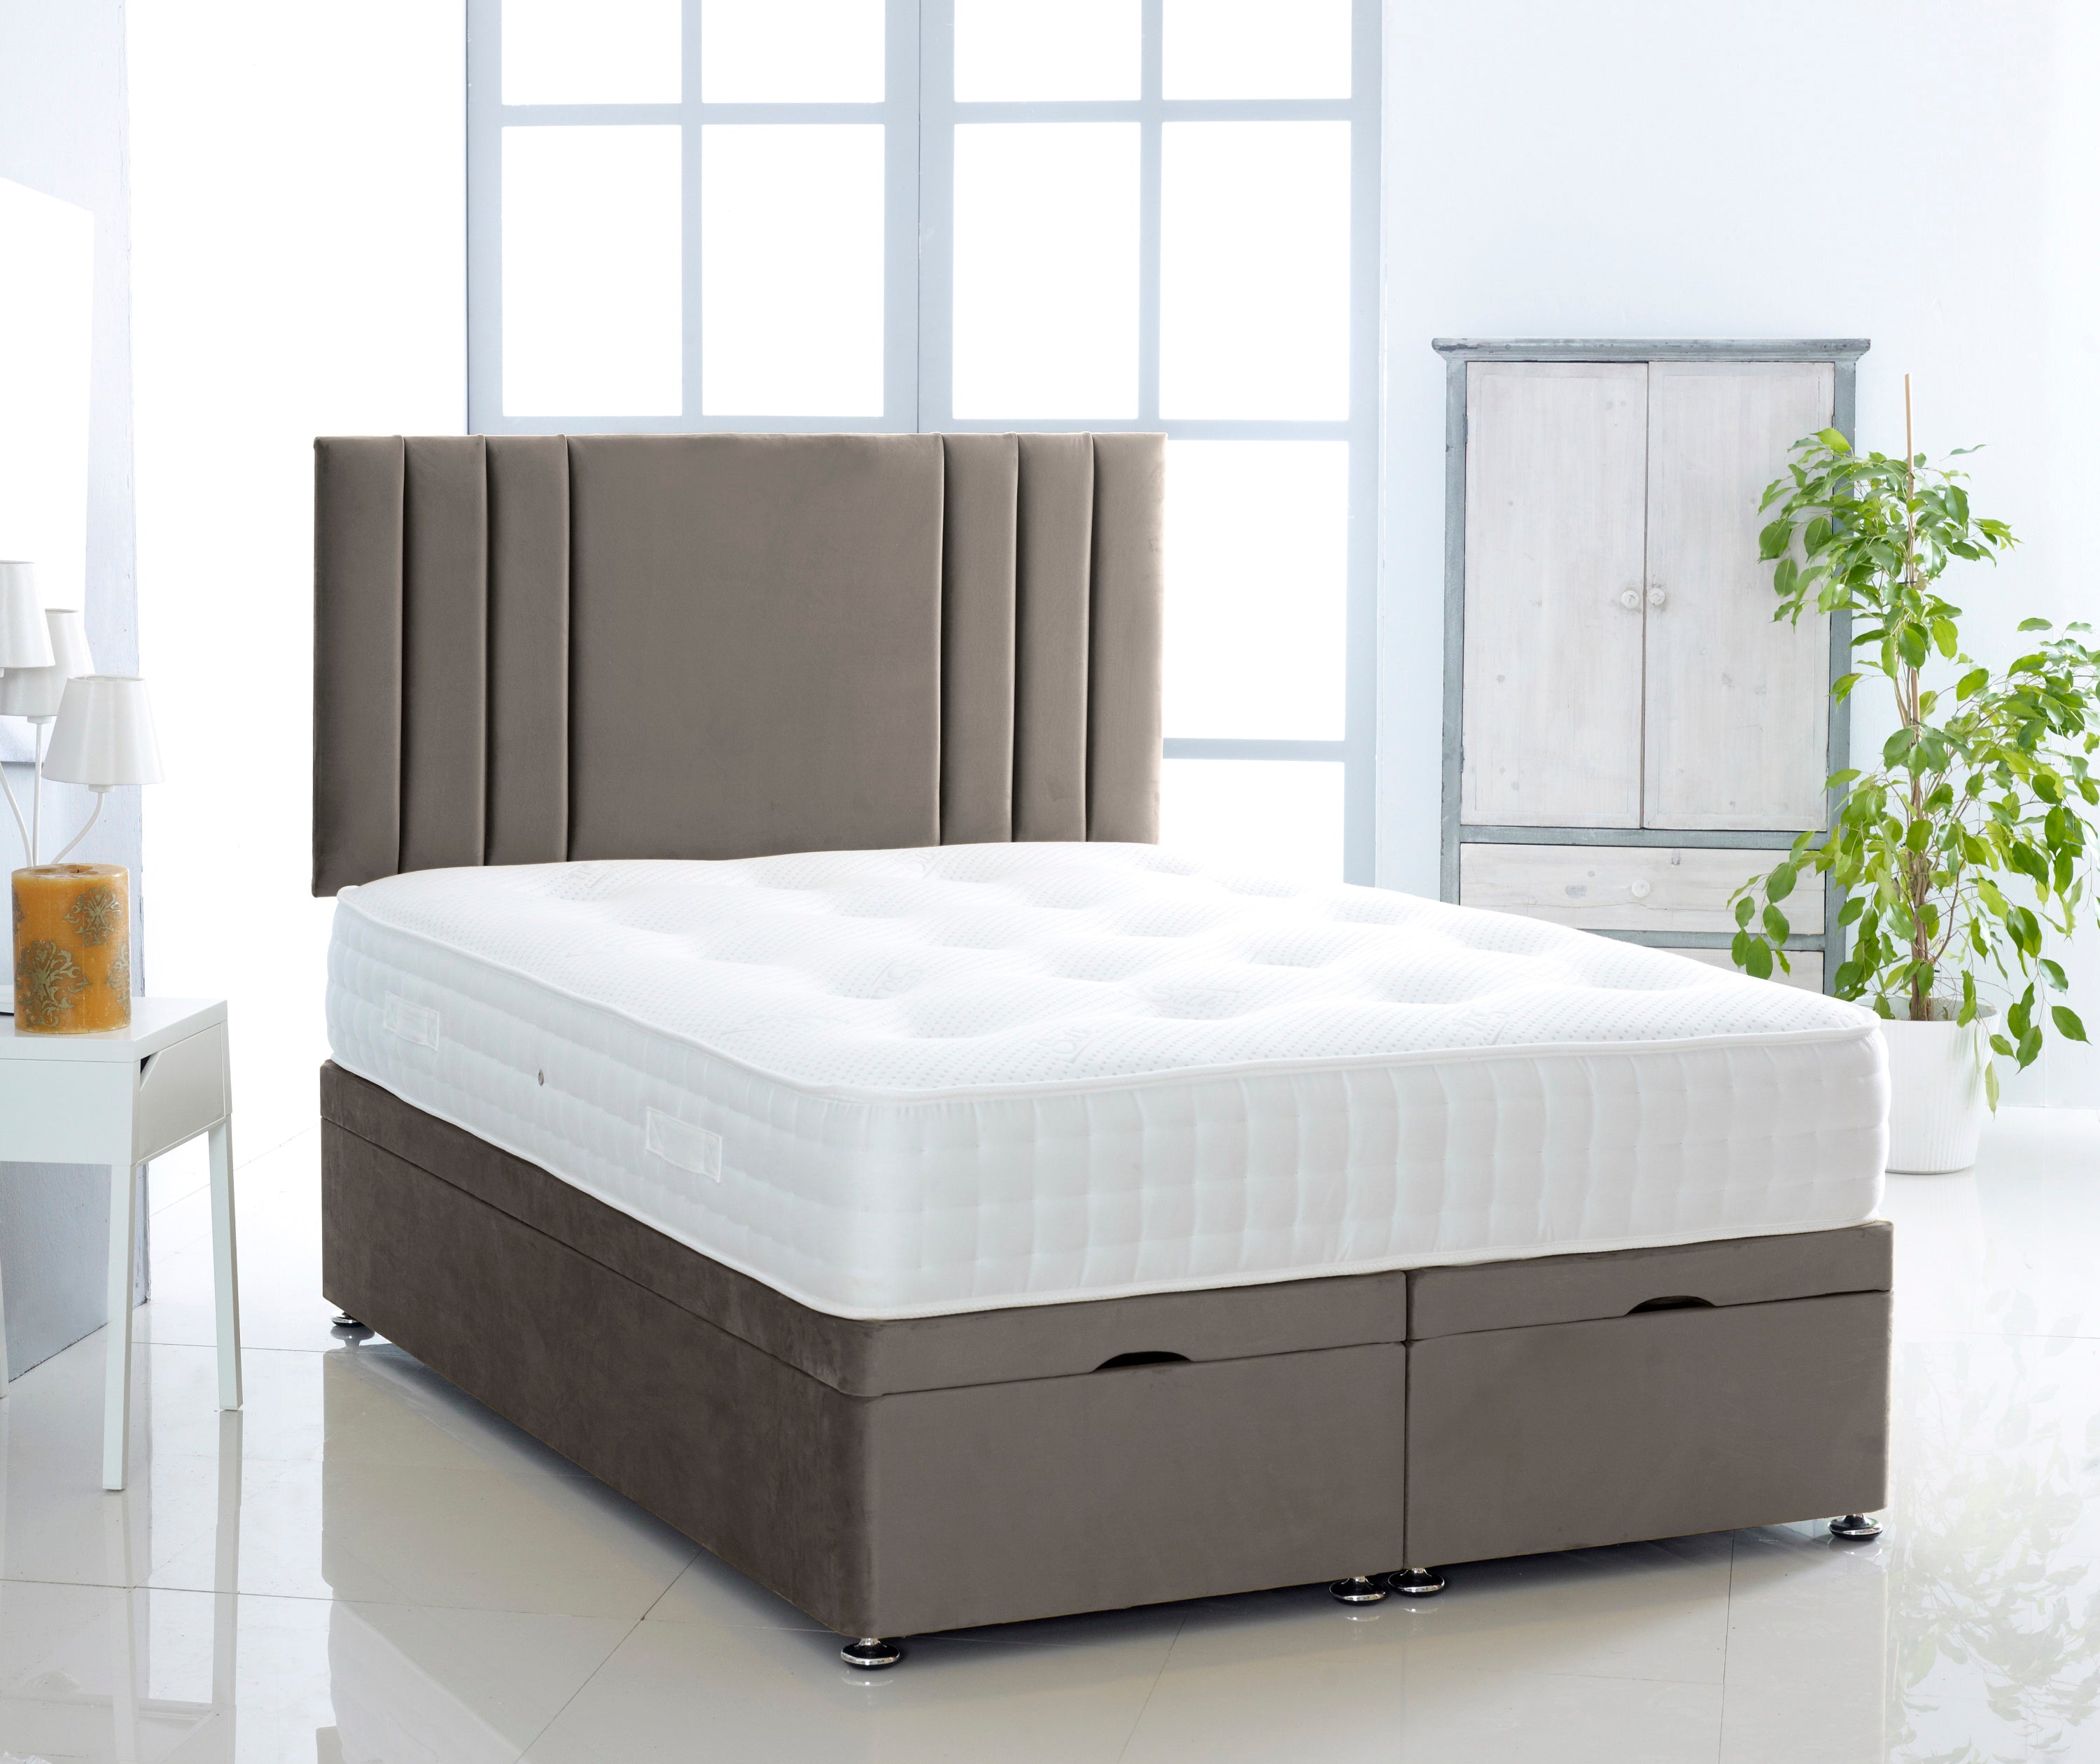 Plush Ottoman Storage Divan Bed With Vertical Lined Headboard